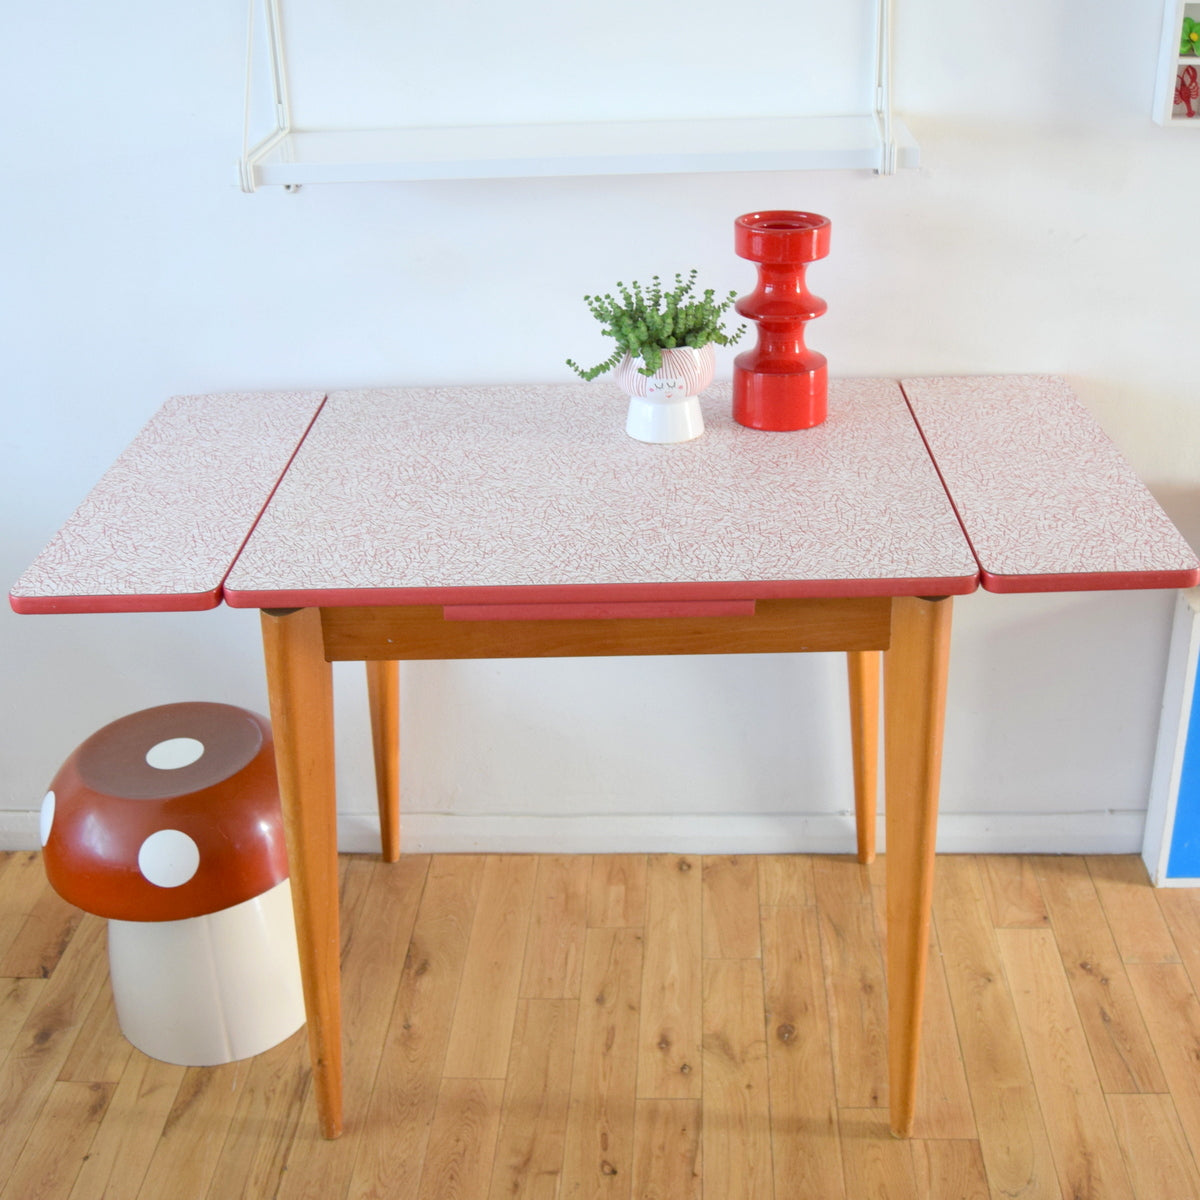 Vintage 1950s Extending Formica Table - Printed Formica - Red & Grey